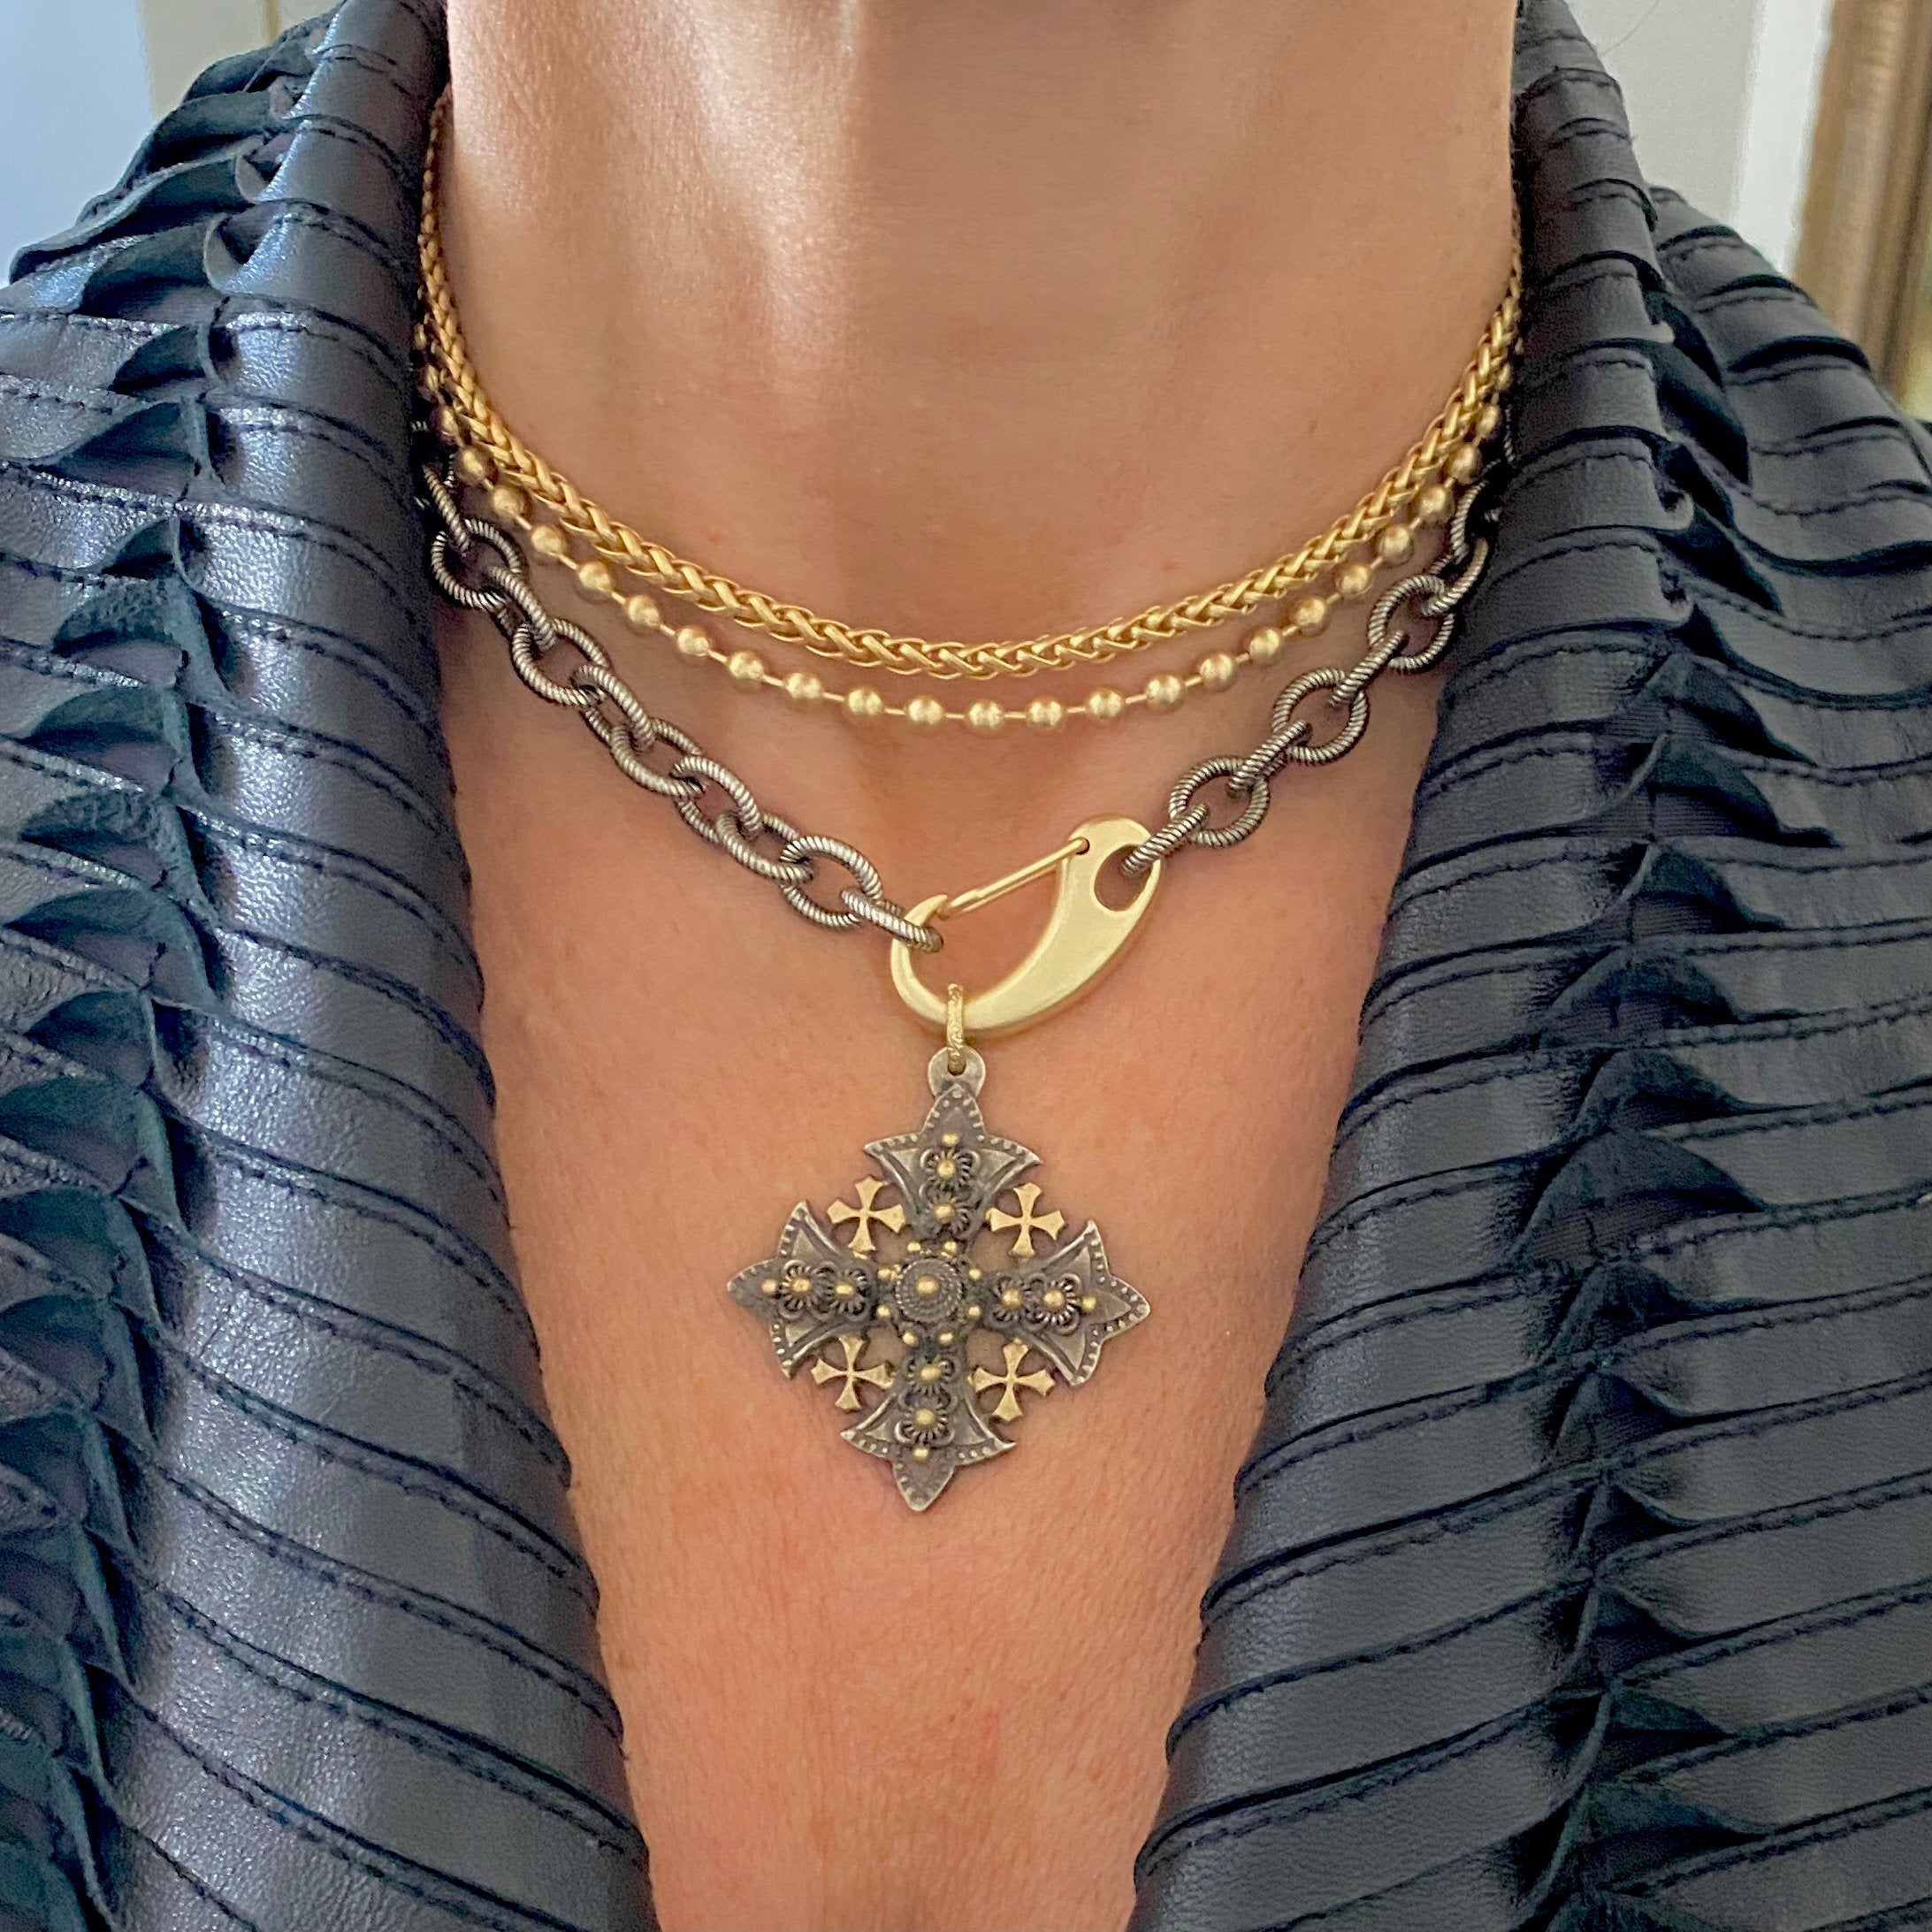 14k Gold Jerusalem Cross Necklace with Diamonds hand crafted in the Holy  Land